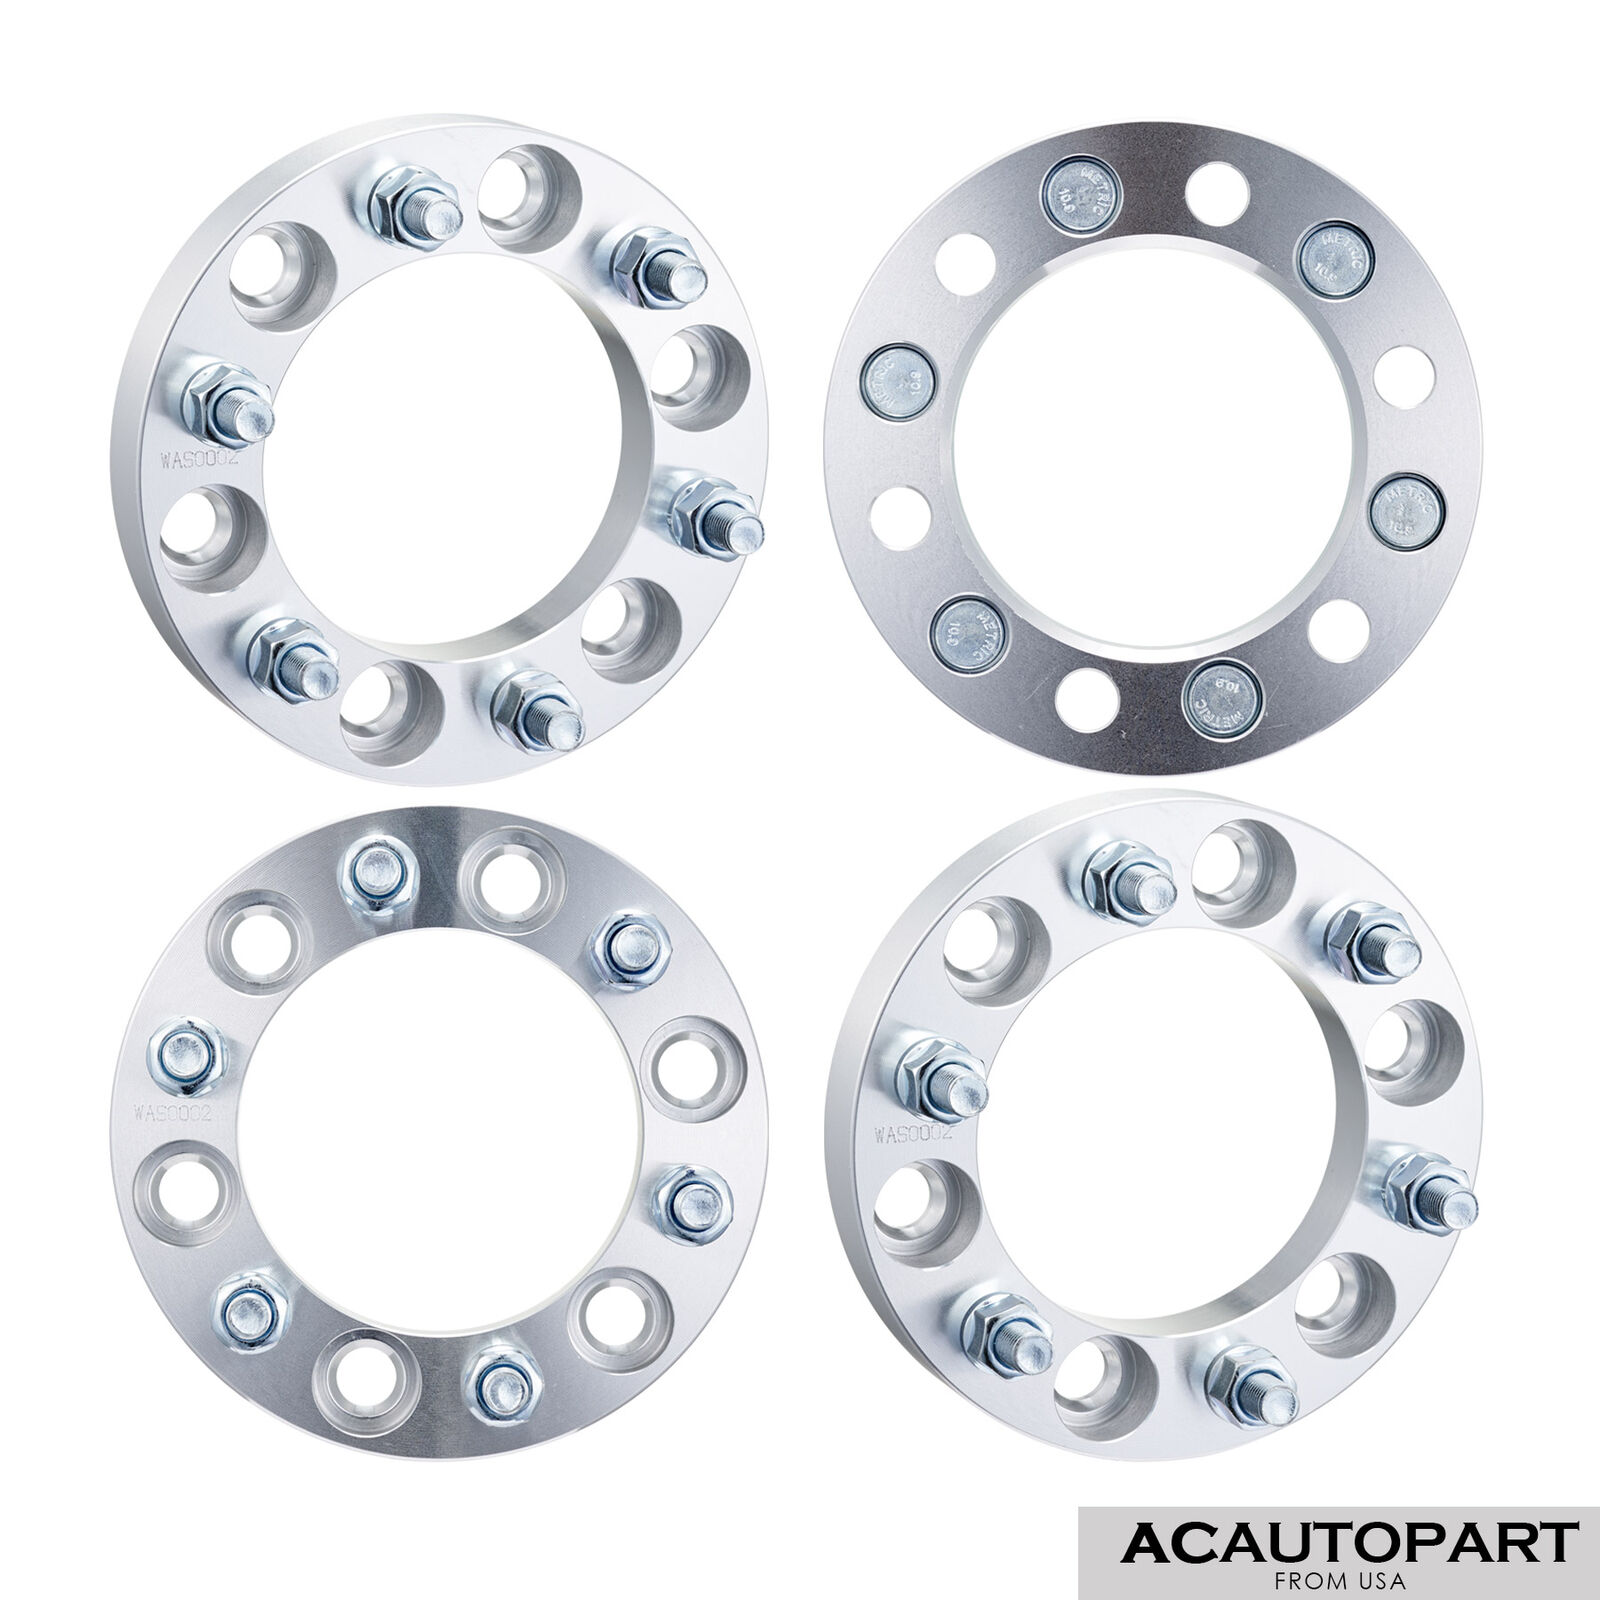 4X WHEEL SPACERS ADAPTERS 1\'\' 6X5.5  For TACOMA TUNDRA 4RUNNER  6 LUG